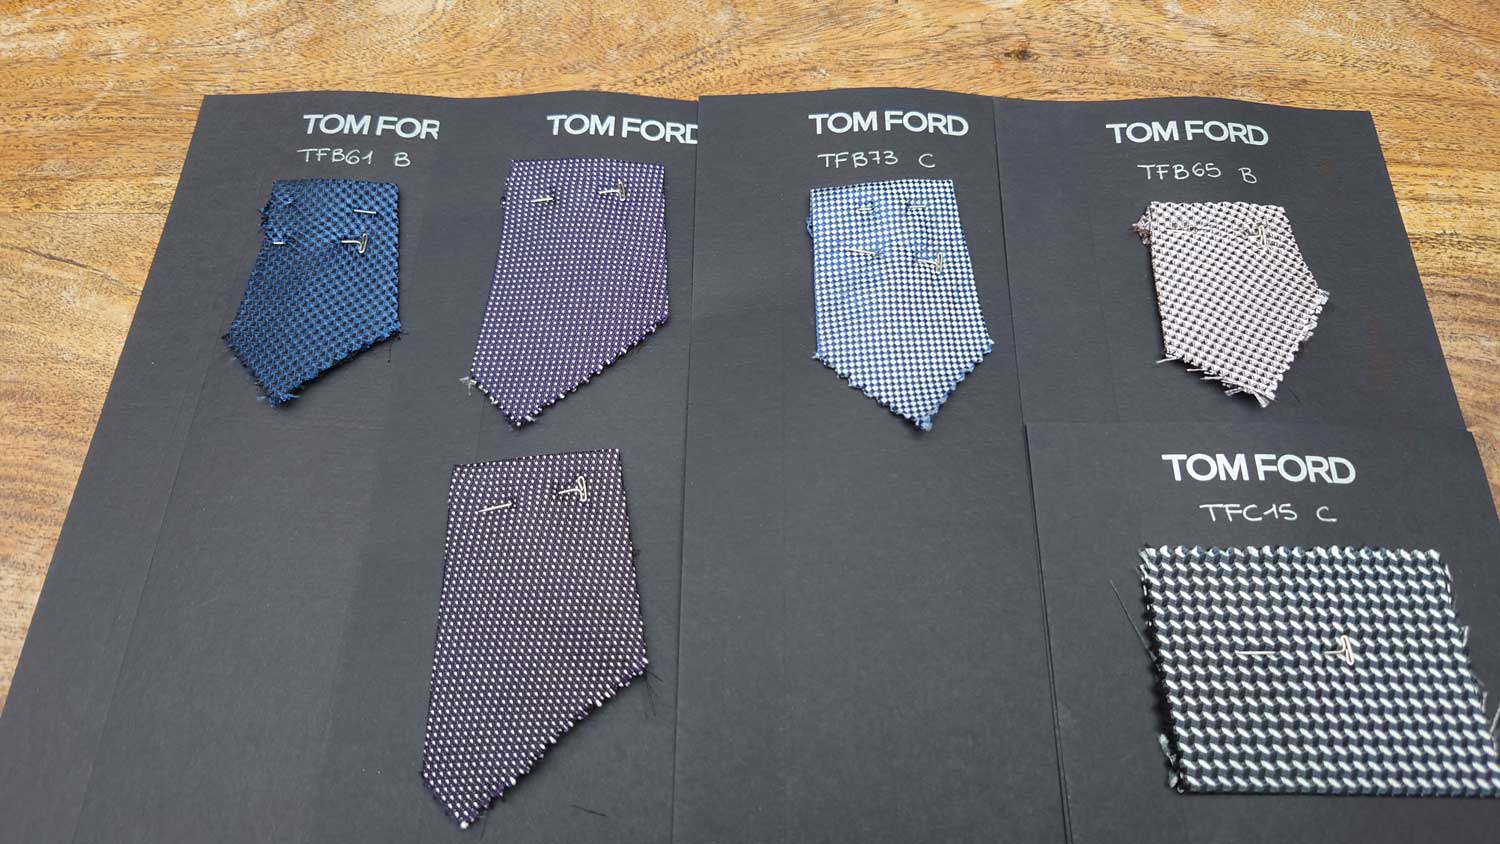 Tom Ford Ties swatches